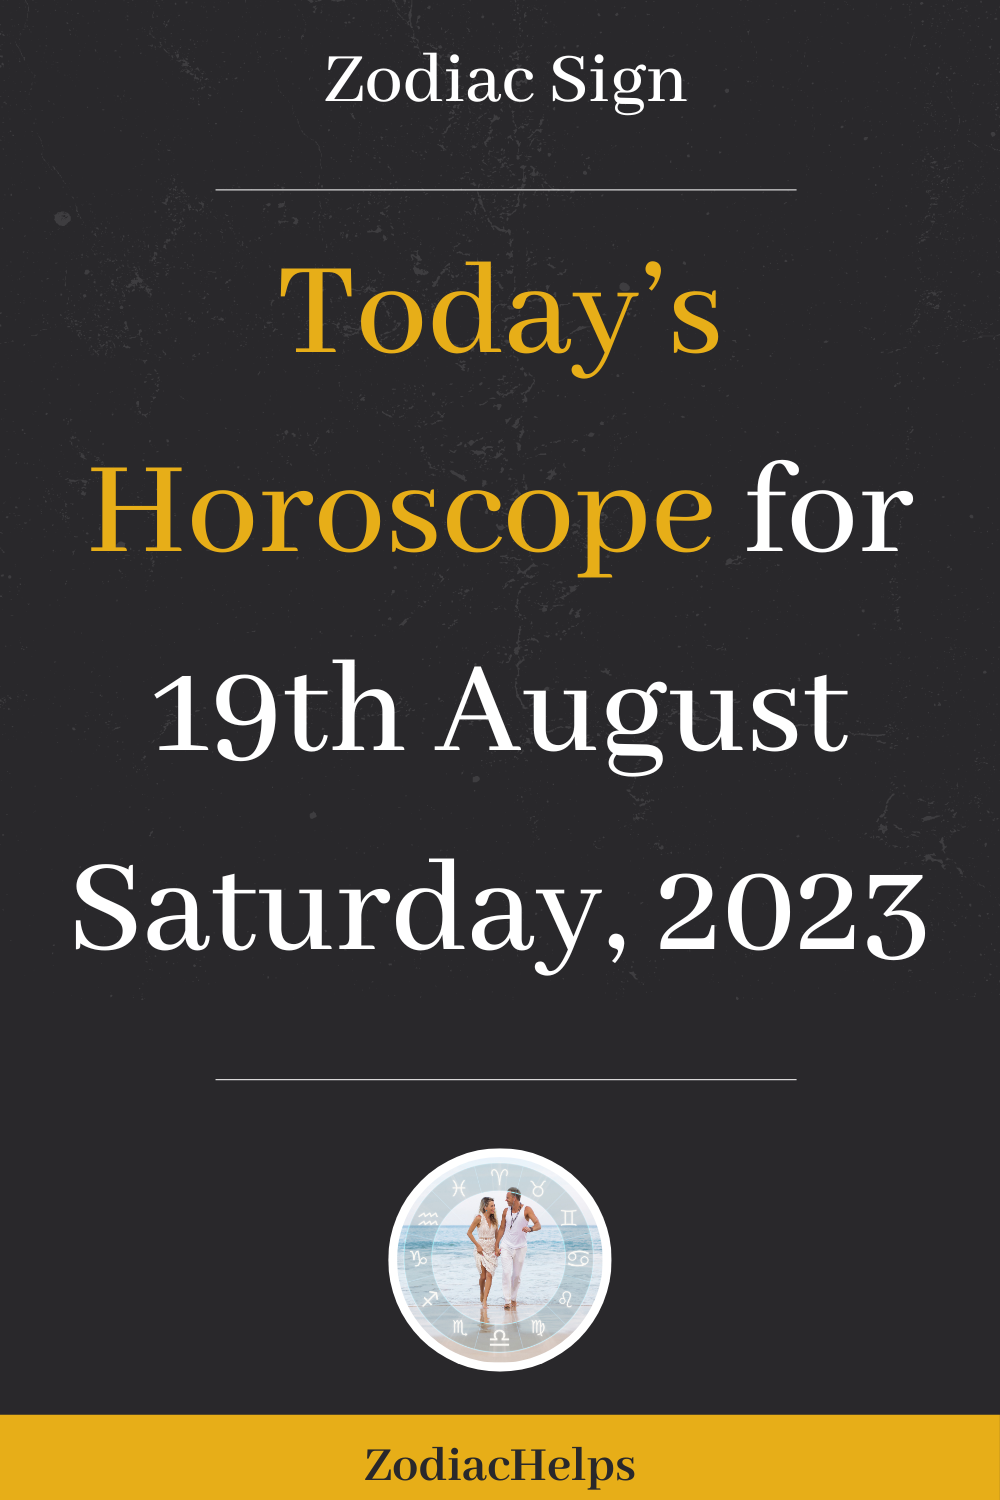 Today’s Horoscope for 19th August Saturday, 2023